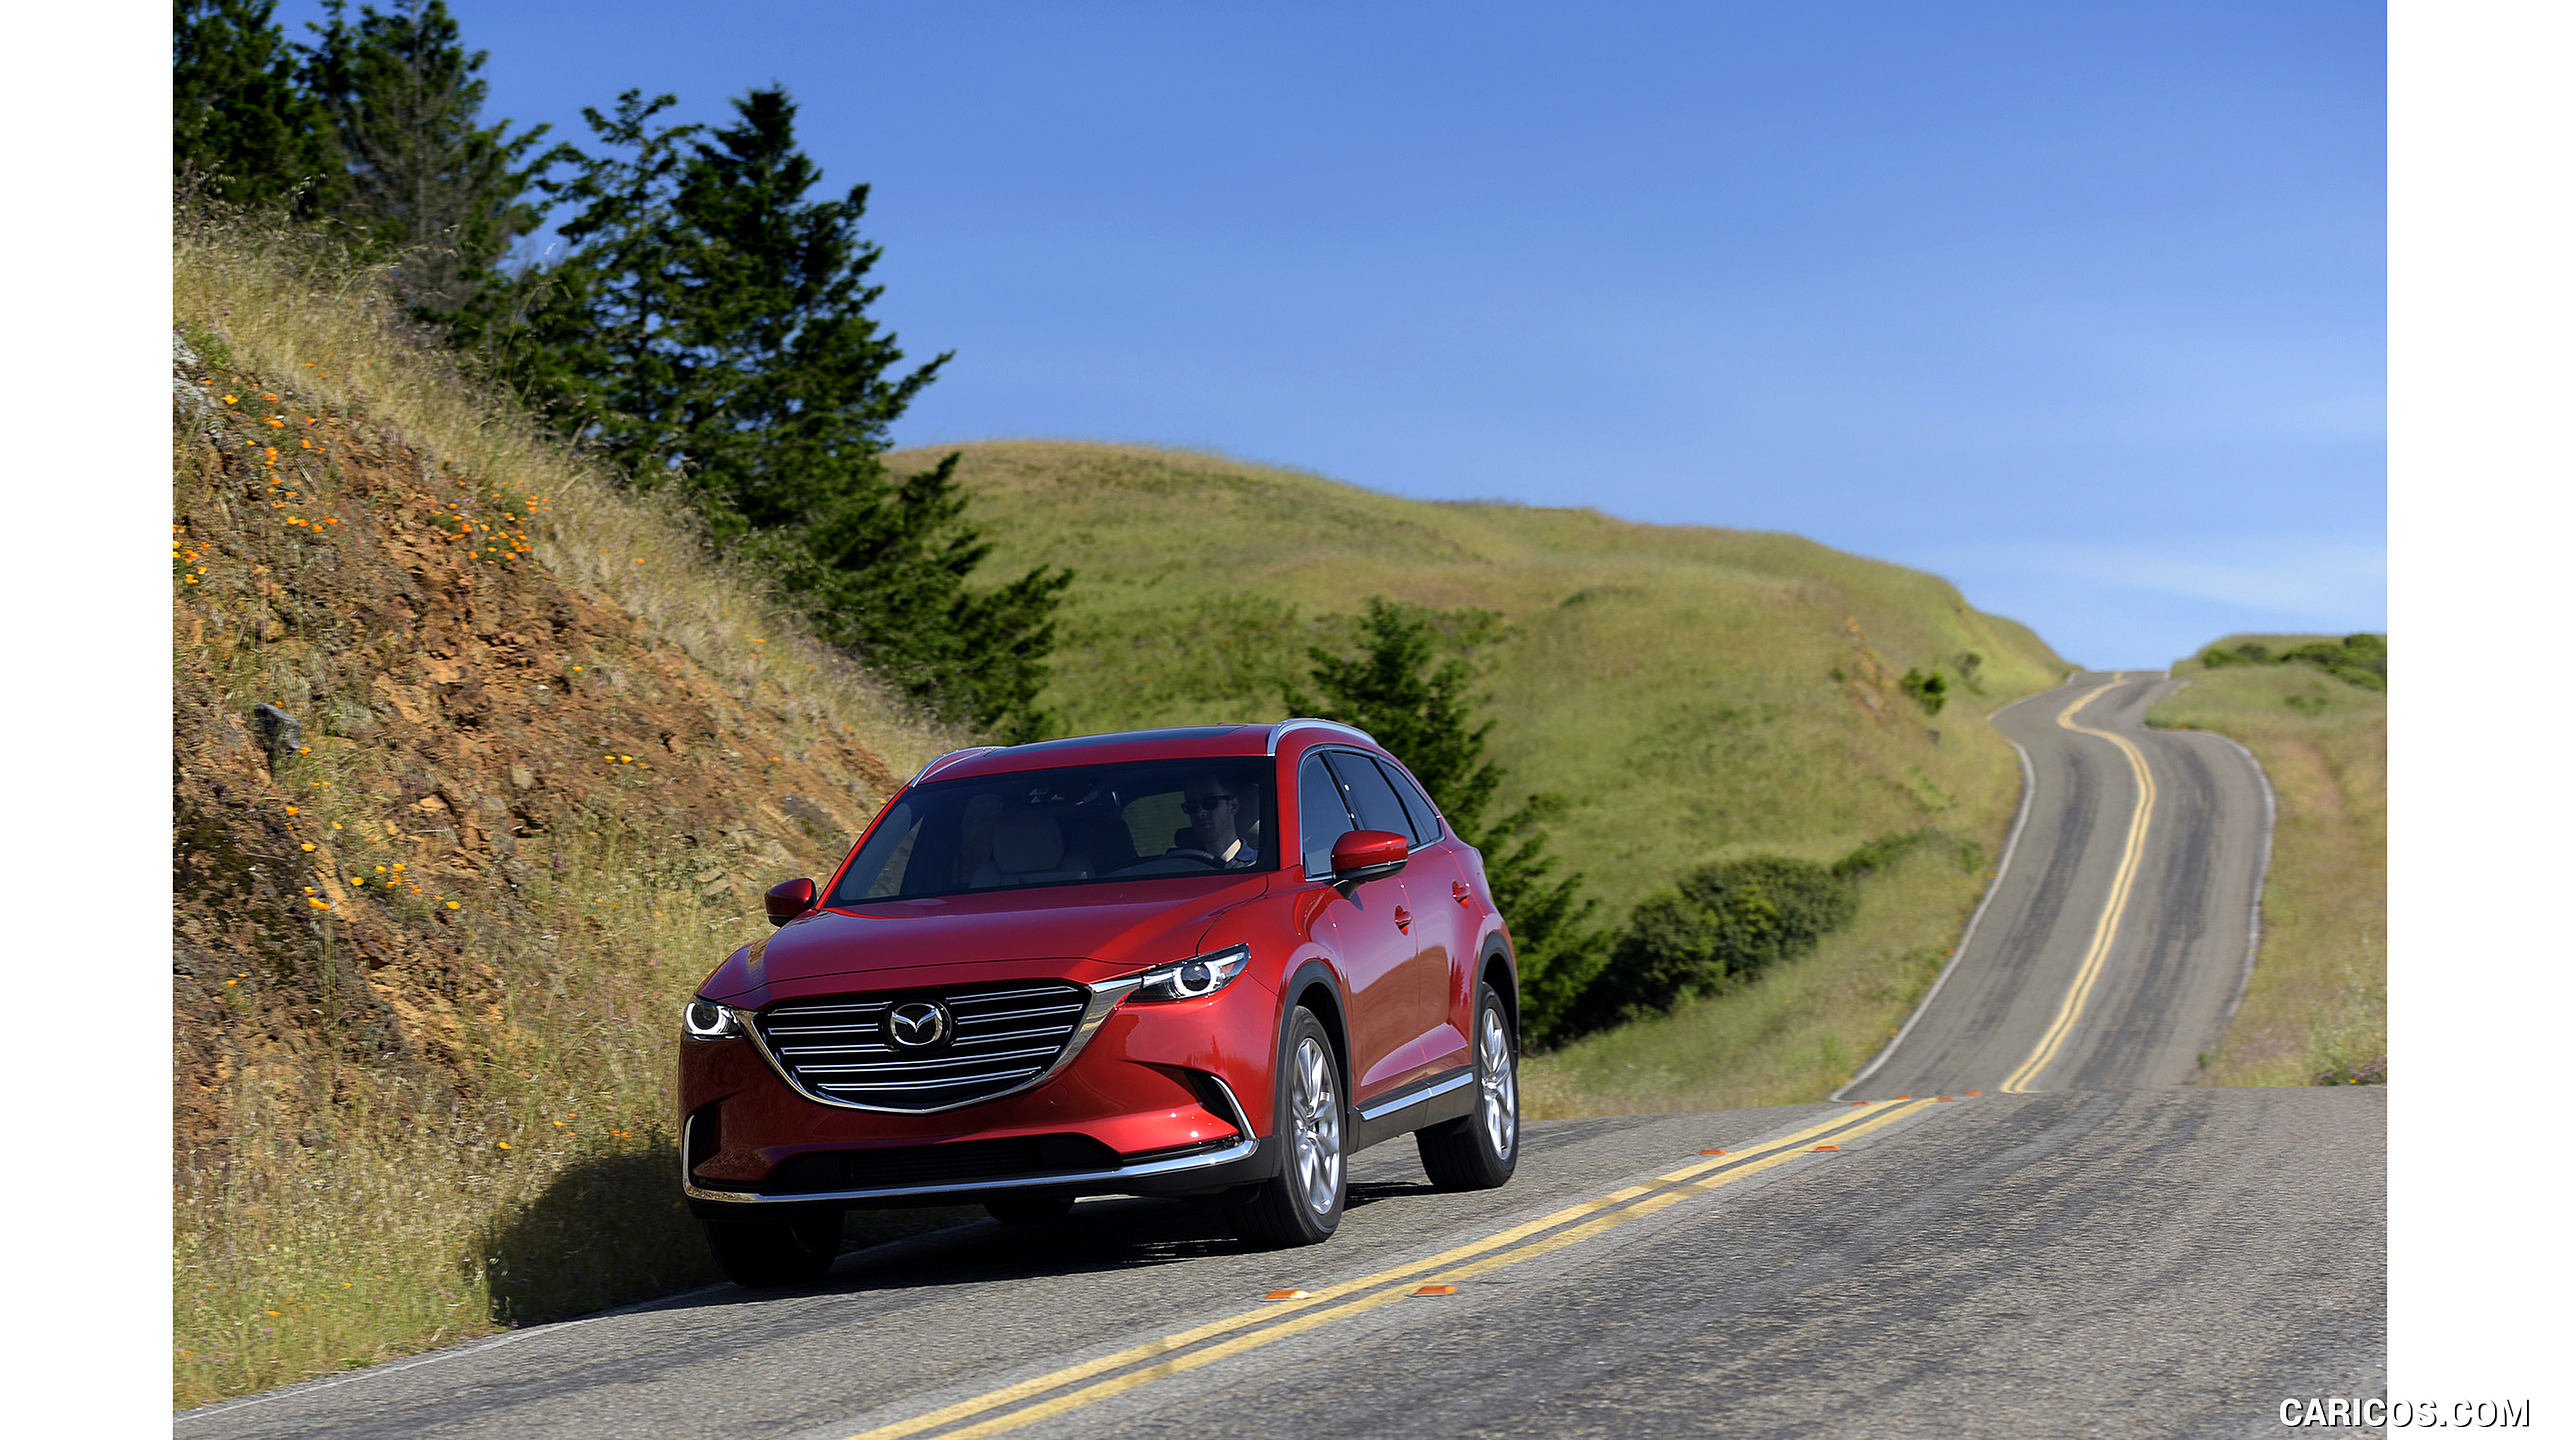 2016 Mazda CX-9 - Front, #43 of 69